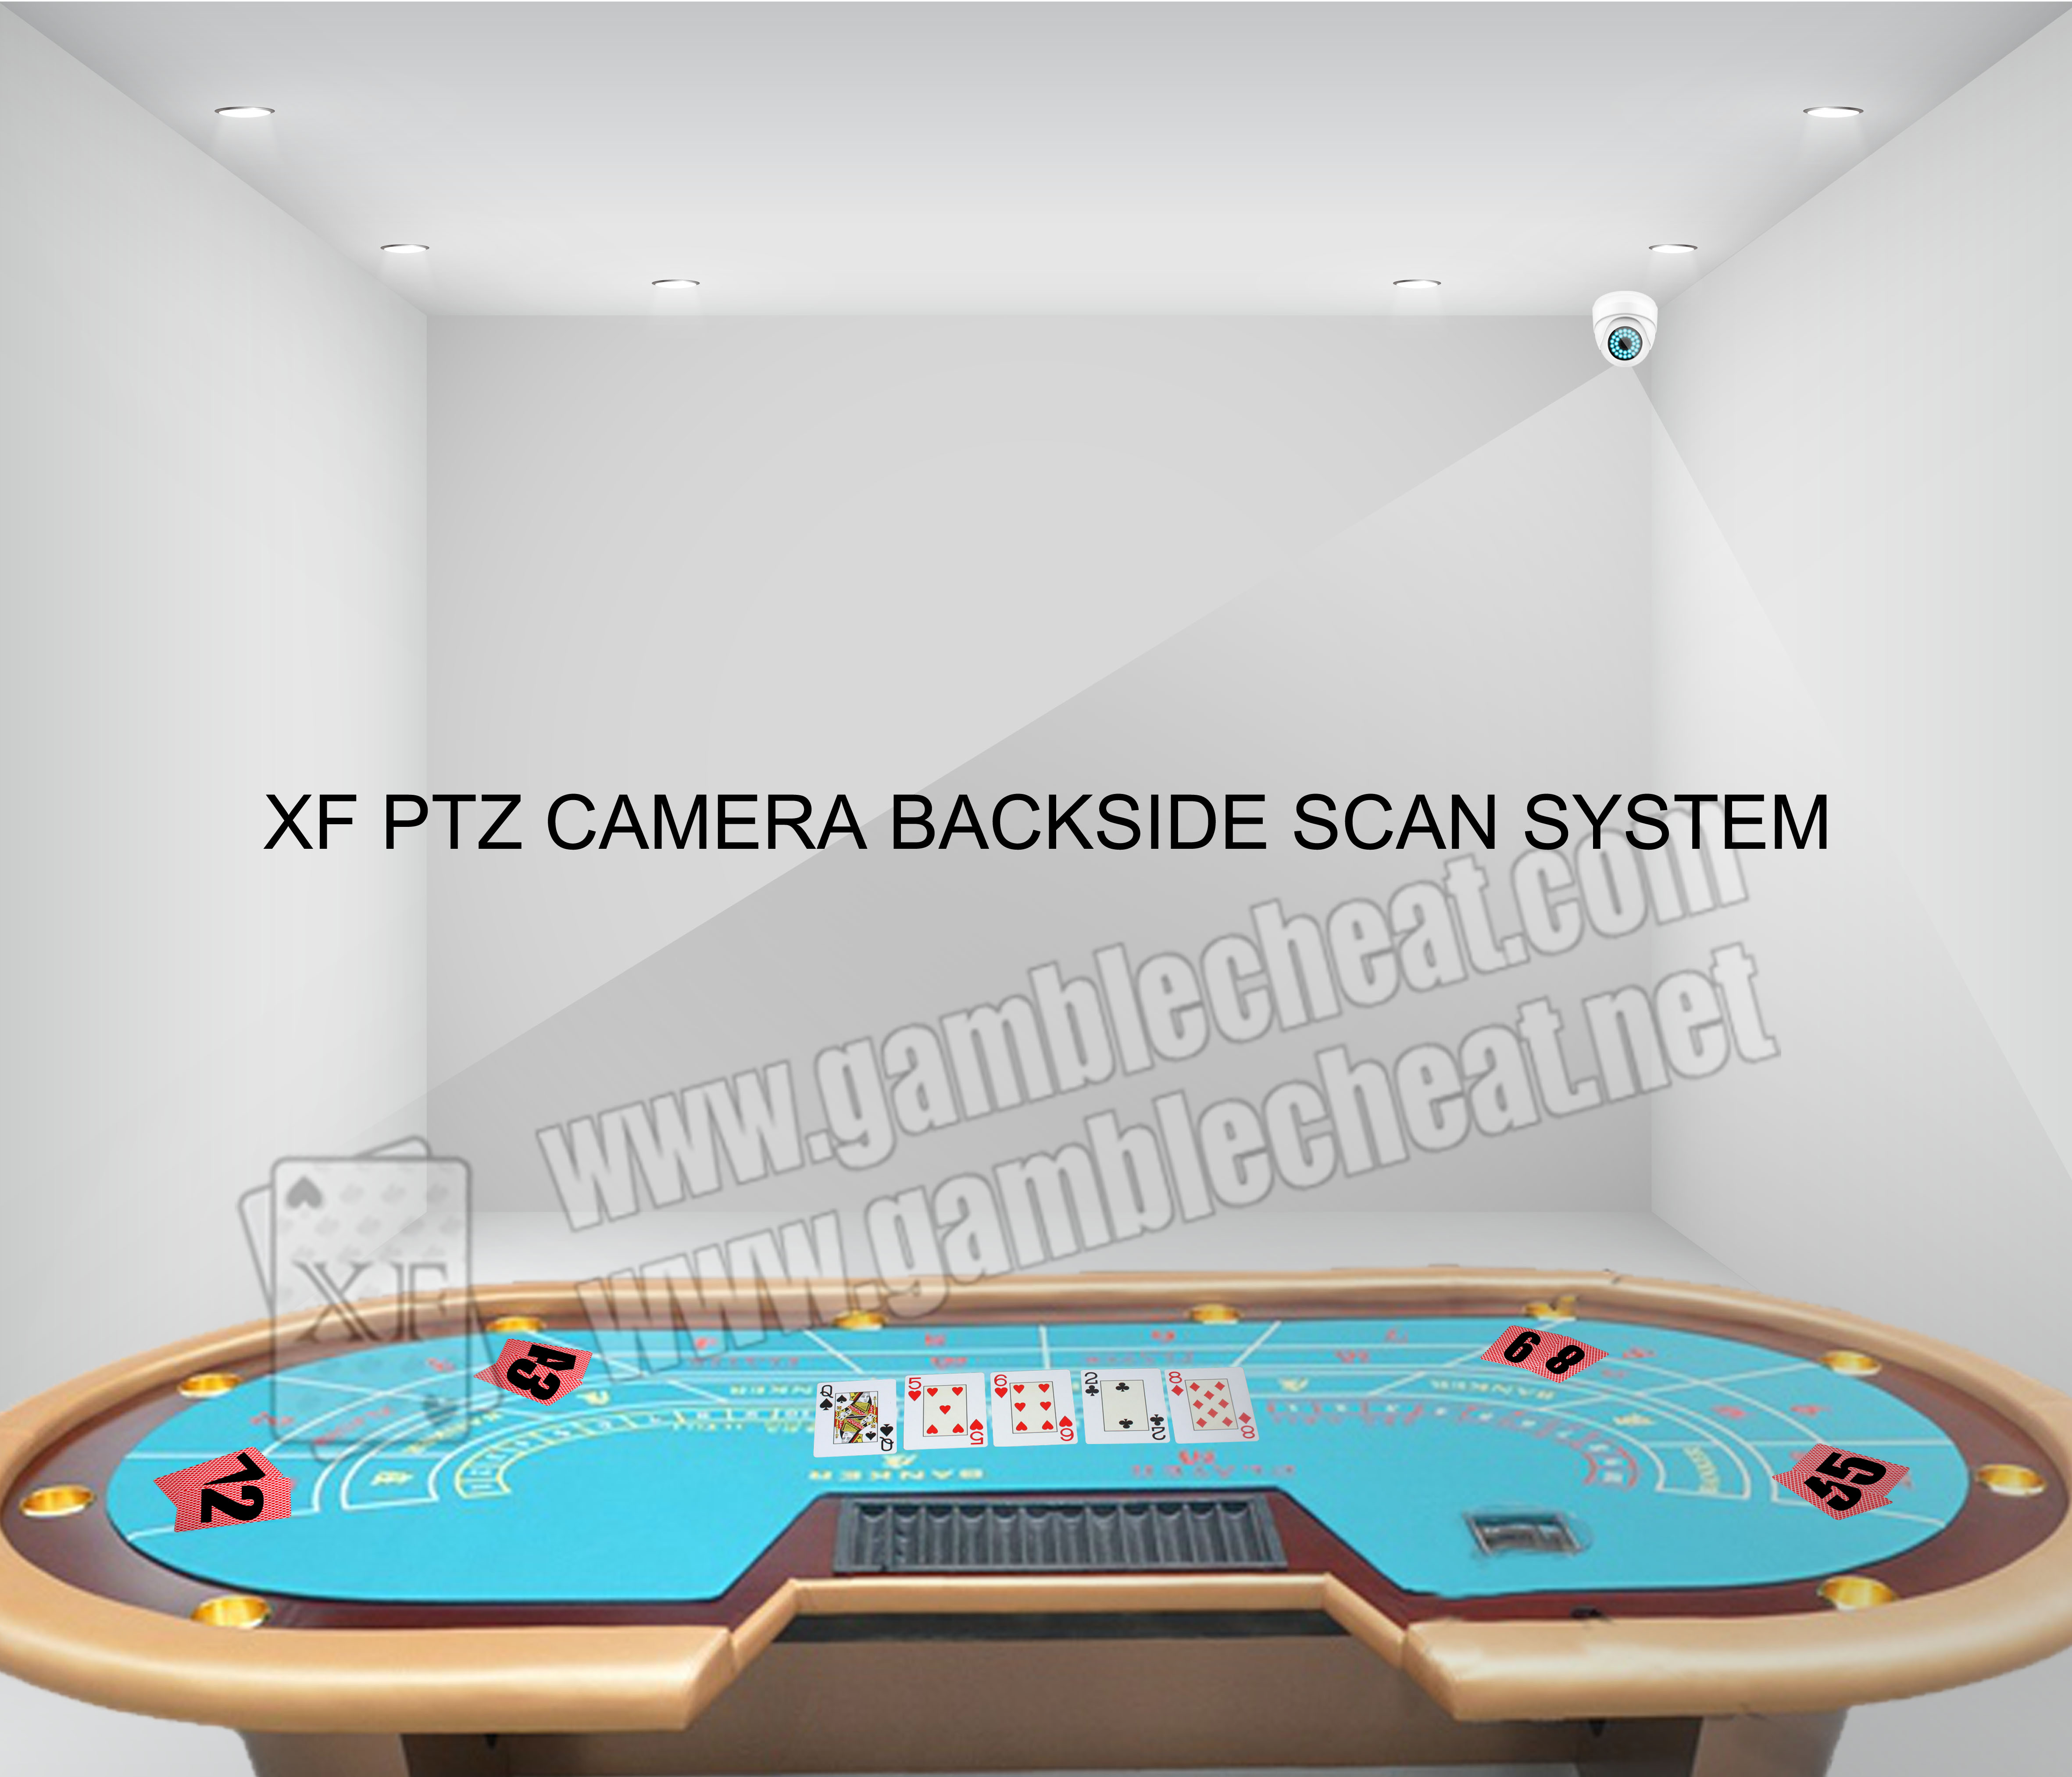 XF brand new PTZ backside marking camera for backside marking playing cards/ playing cards china / marked cards china / poker cheat / texas hold em cheat / omaha cheat / cheat in poker / cheat poker /